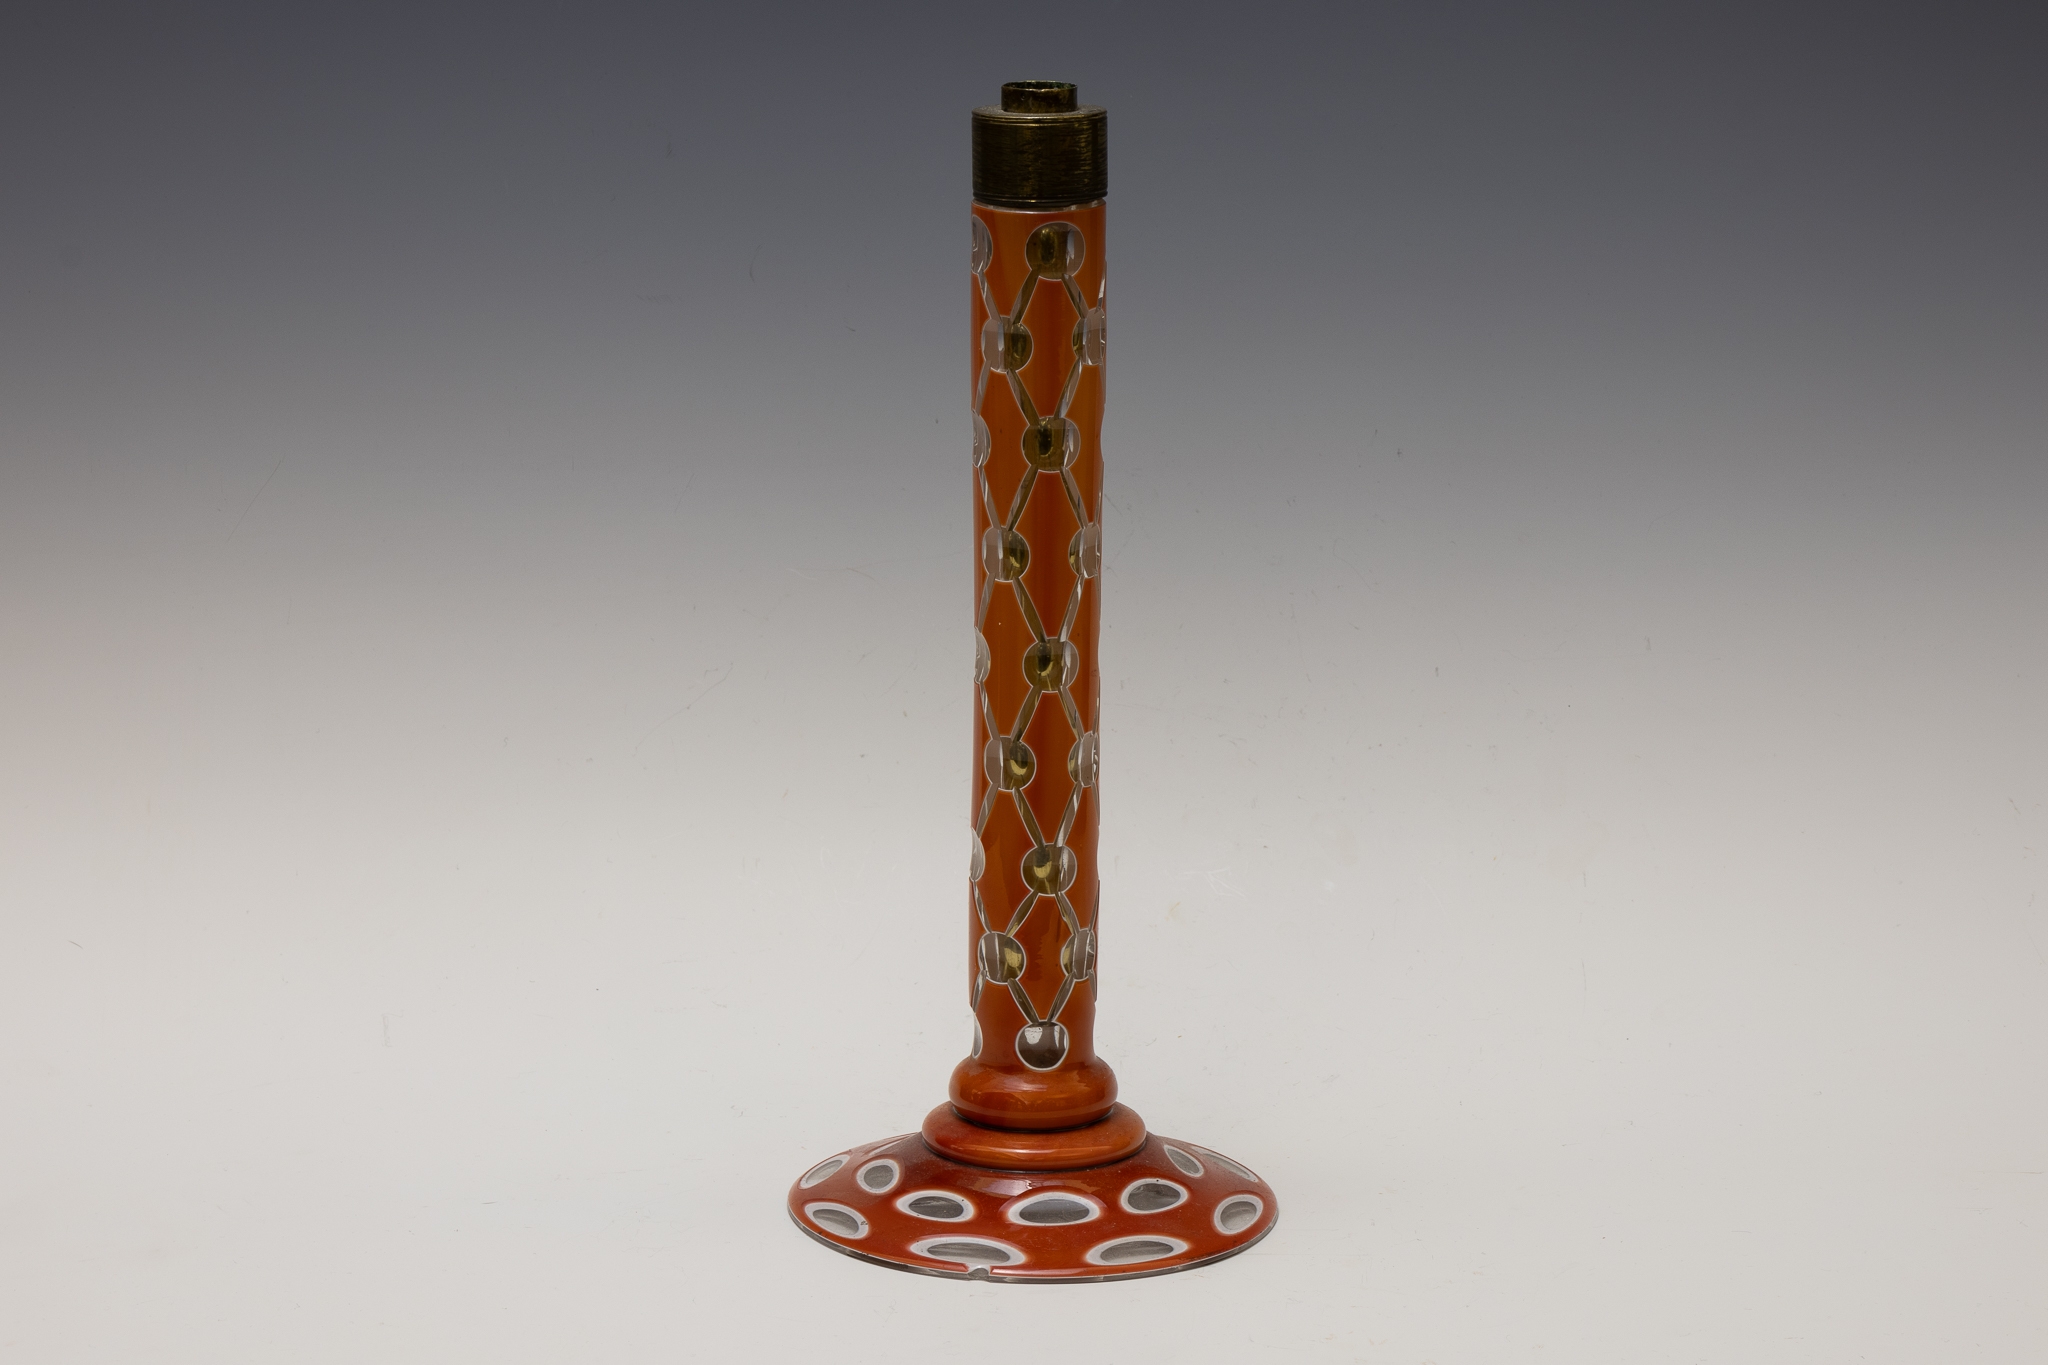 An Antique Bohemian Glass Lamp Stand from the Mid-19th Century.

H: Approximately 37cm 